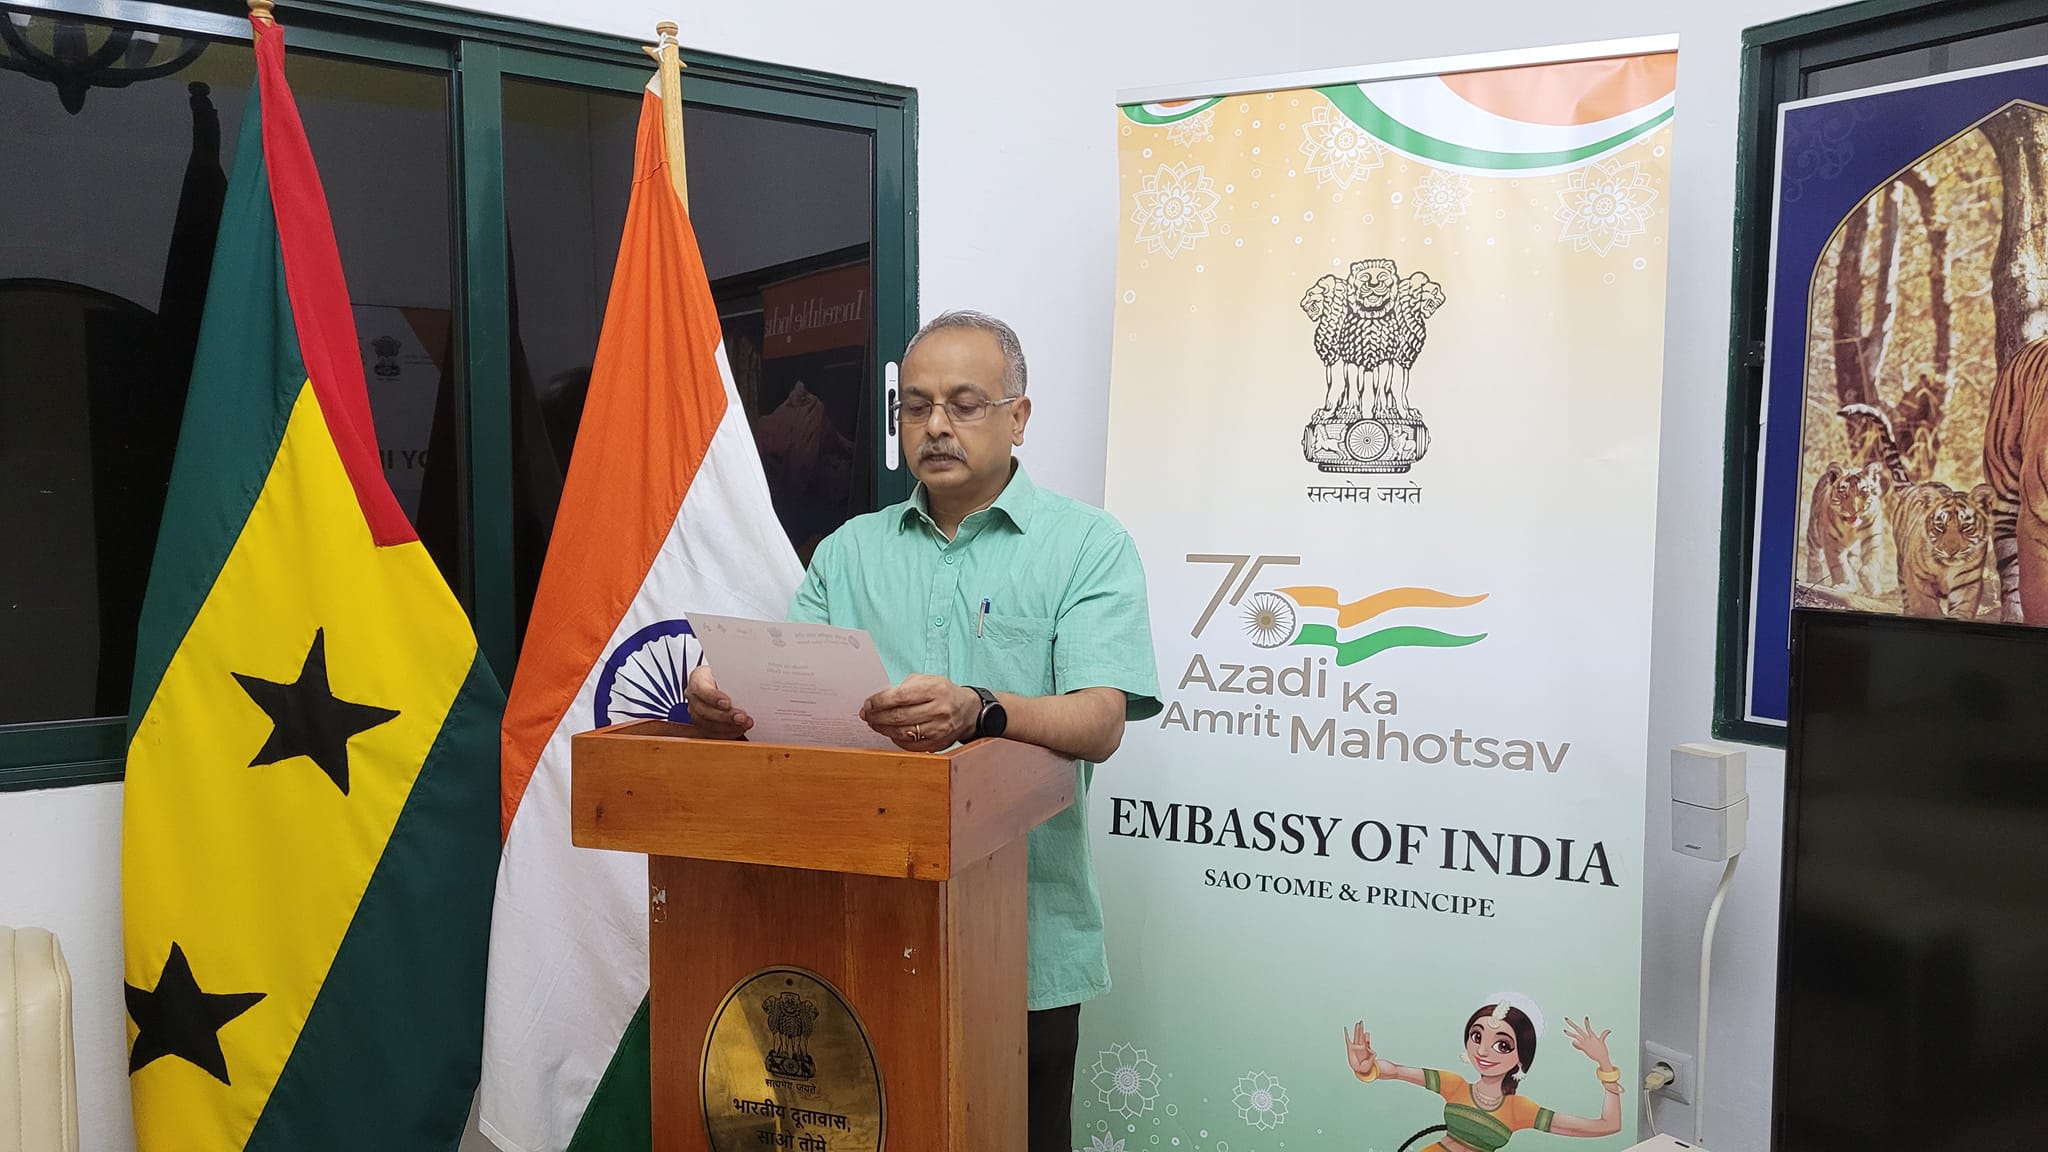 Embassy of India, Sao Tome held an Open House for the Indian diaspora and briefed them about the upcoming events and especially the live telecast of 100 th episode of Mann Ki Baat by Prime Minister.